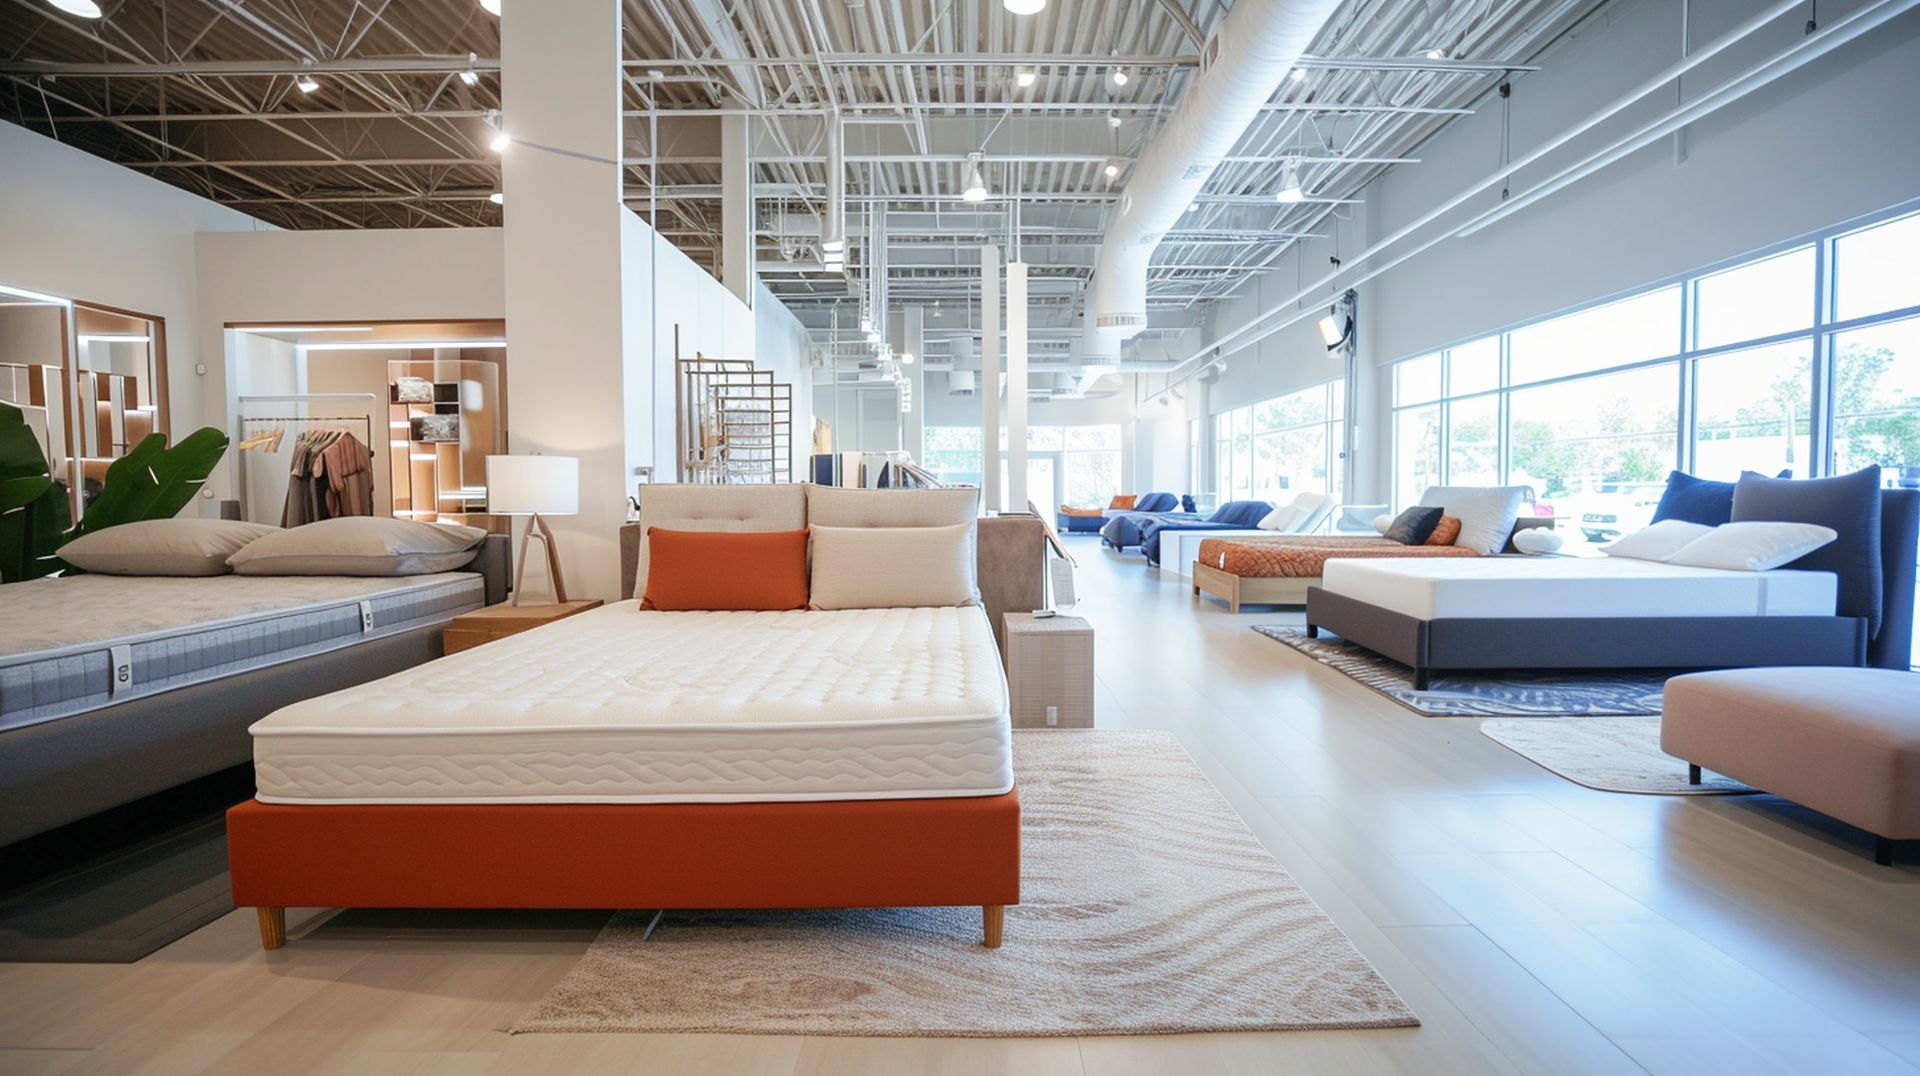 Local Anaheim mattress stores have the best prices, sales, and deals if you're looking for a new mattress in Anaheim